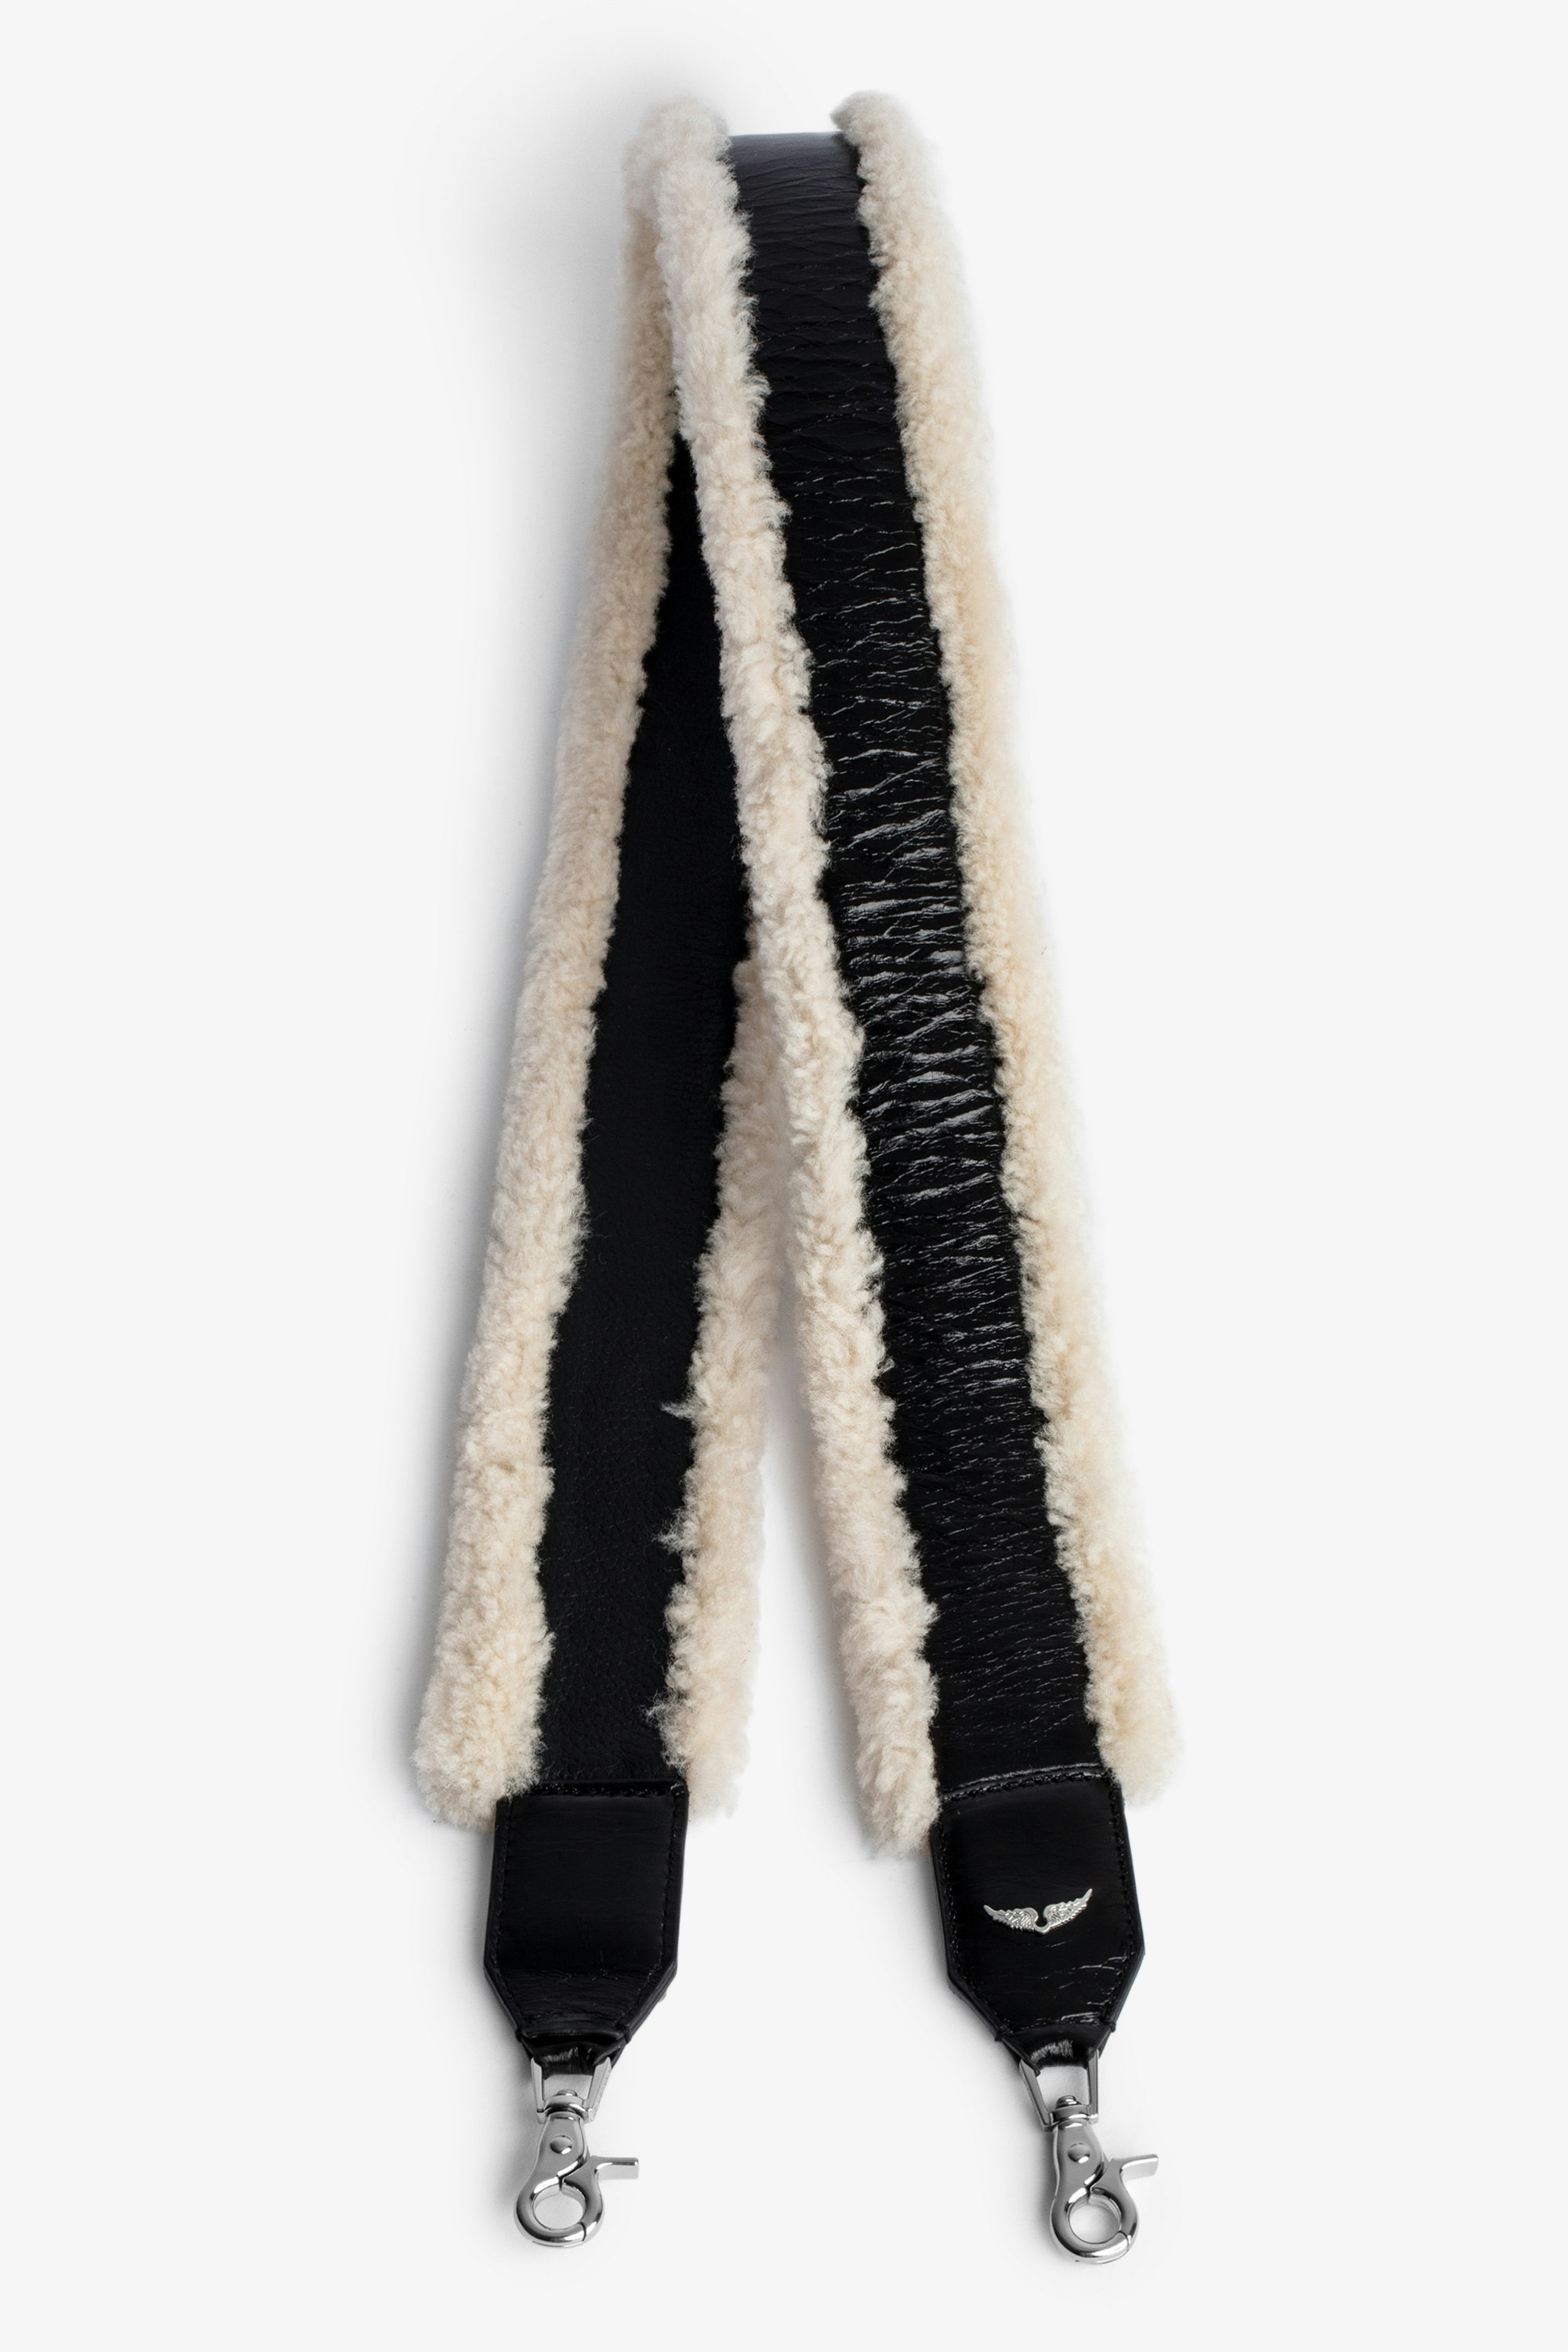 Shearling ストラップ Women’s black vintage leather and shearling shoulder strap with topstitched motifs